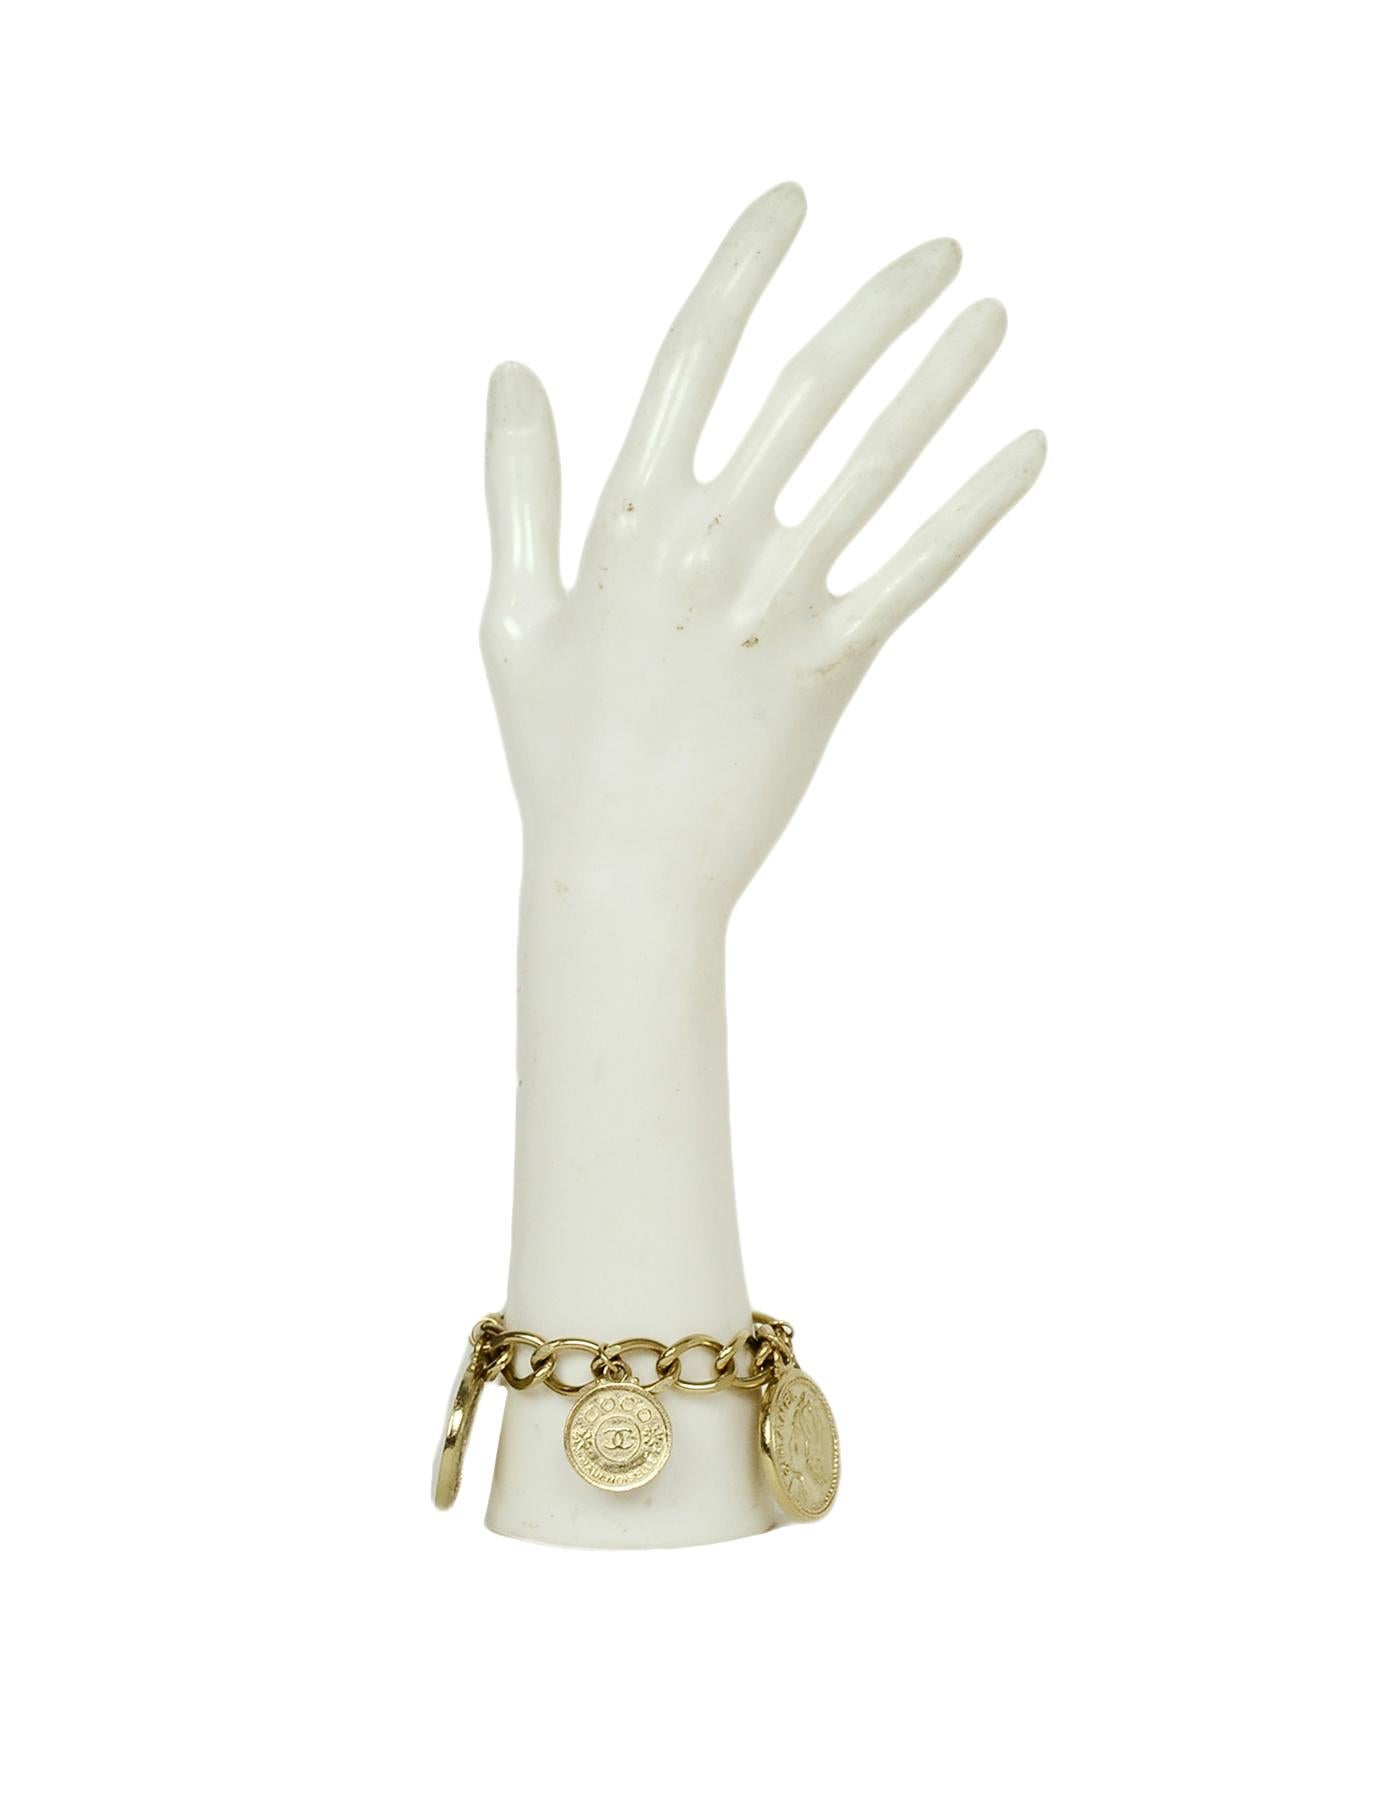 Chanel Goldtone Coco Coin Charm Chainlink Bracelet

Made In: France
Year of Production: 2006
Color: Goldtone
Materials: Metal
Hallmarks: 